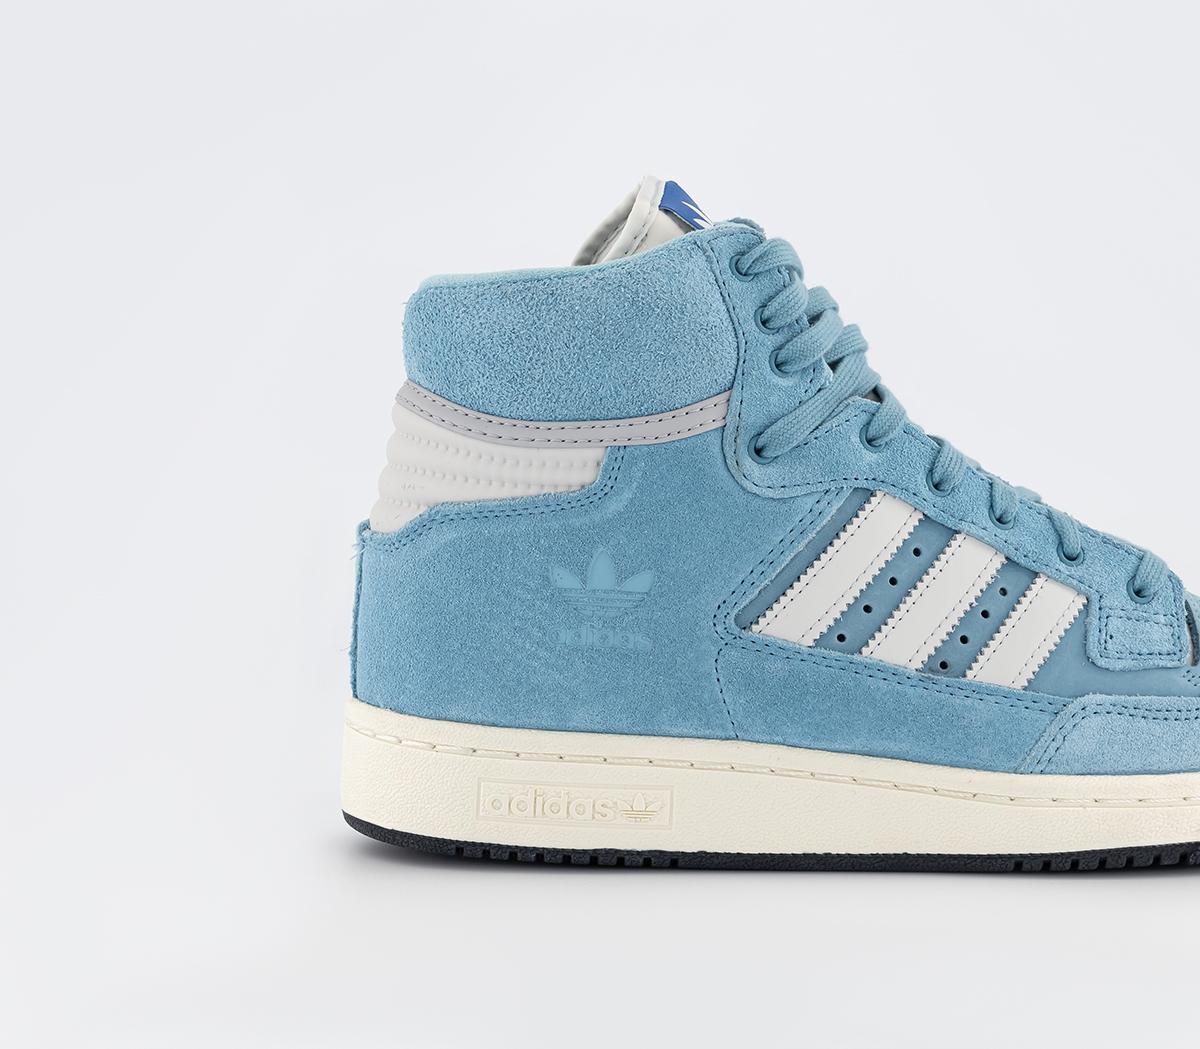 adidas Centennial 85 Hi Trainers Crystal White Baby Blue - Men's Trainers